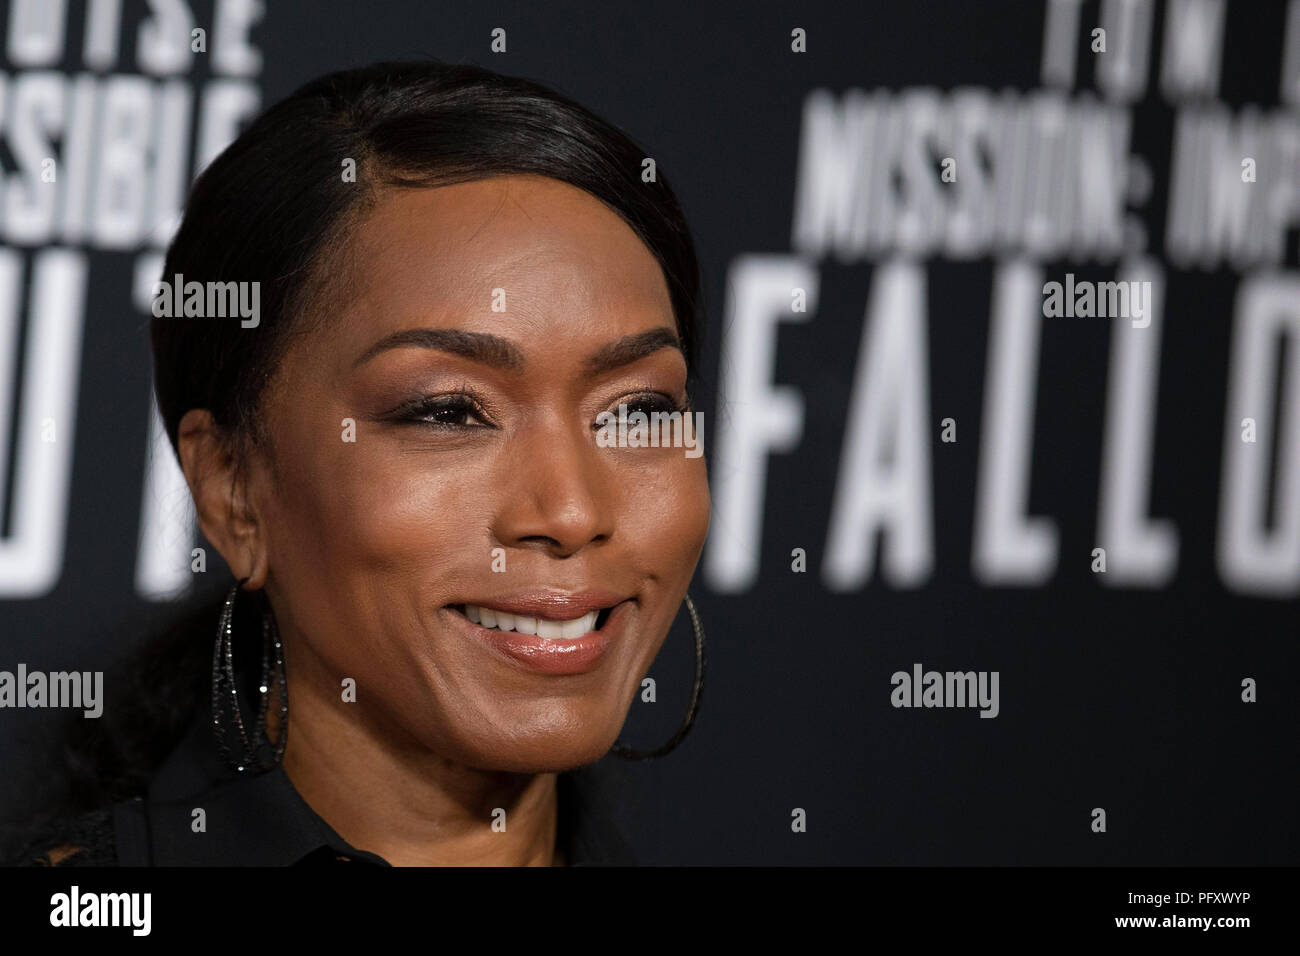 Actress Angela Bassett on the red carpet prior to a screening of Mission Impossible Fallout a the Smithsonian National Air and Space Museum on July 22, in Washington, DC. Stock Photo